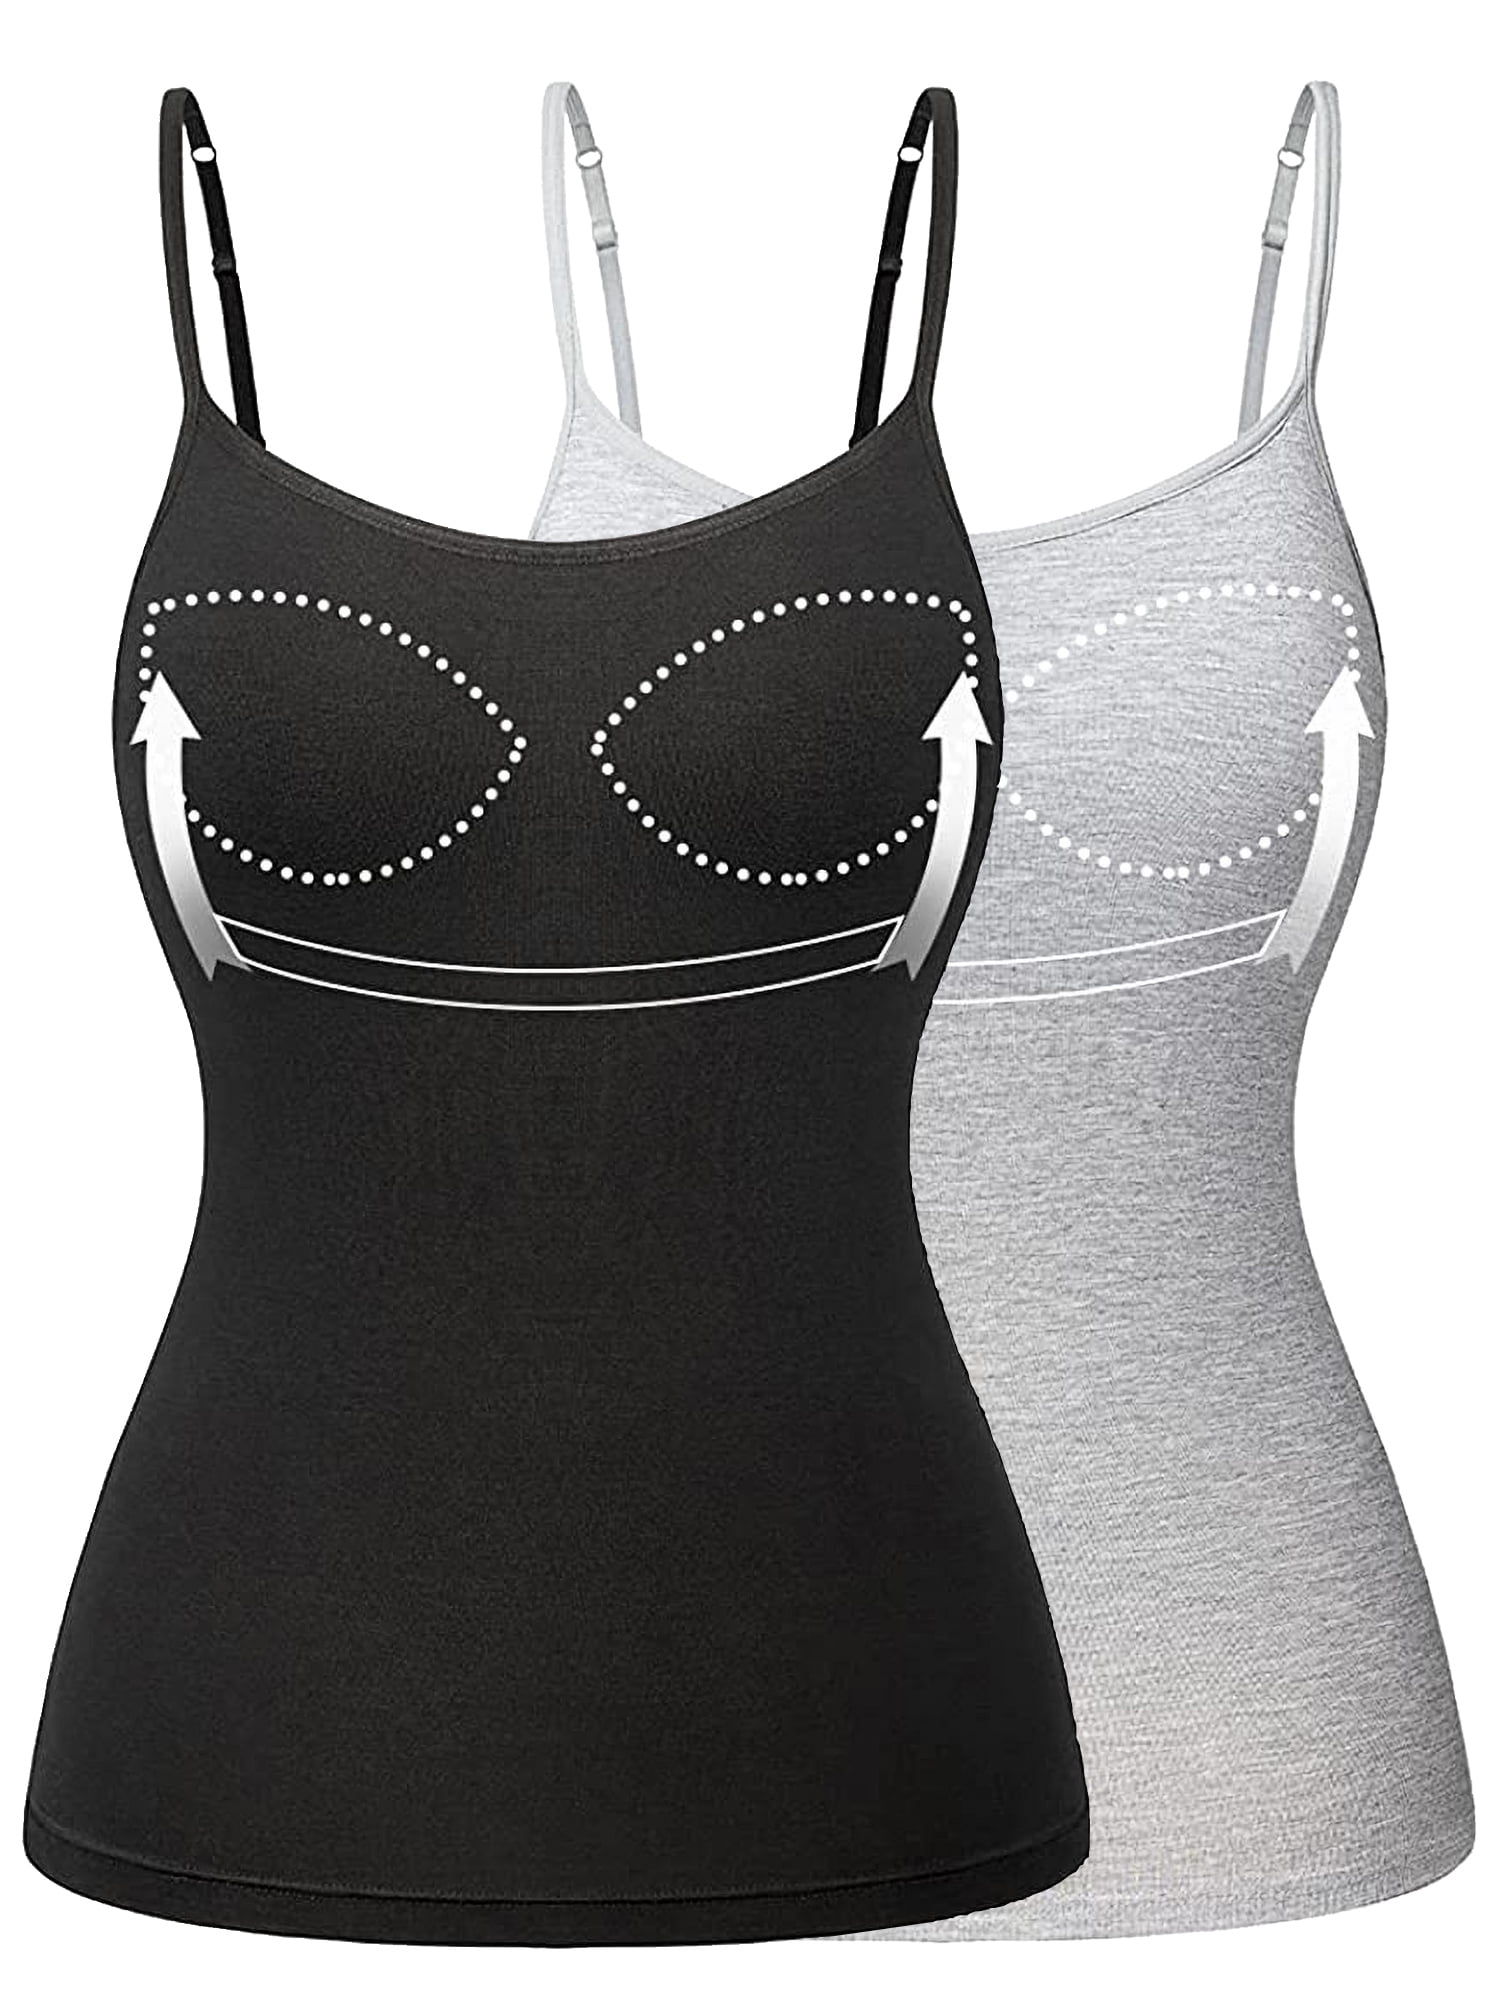 Women Compression Camisole with Built in Removable Bra Pads Body